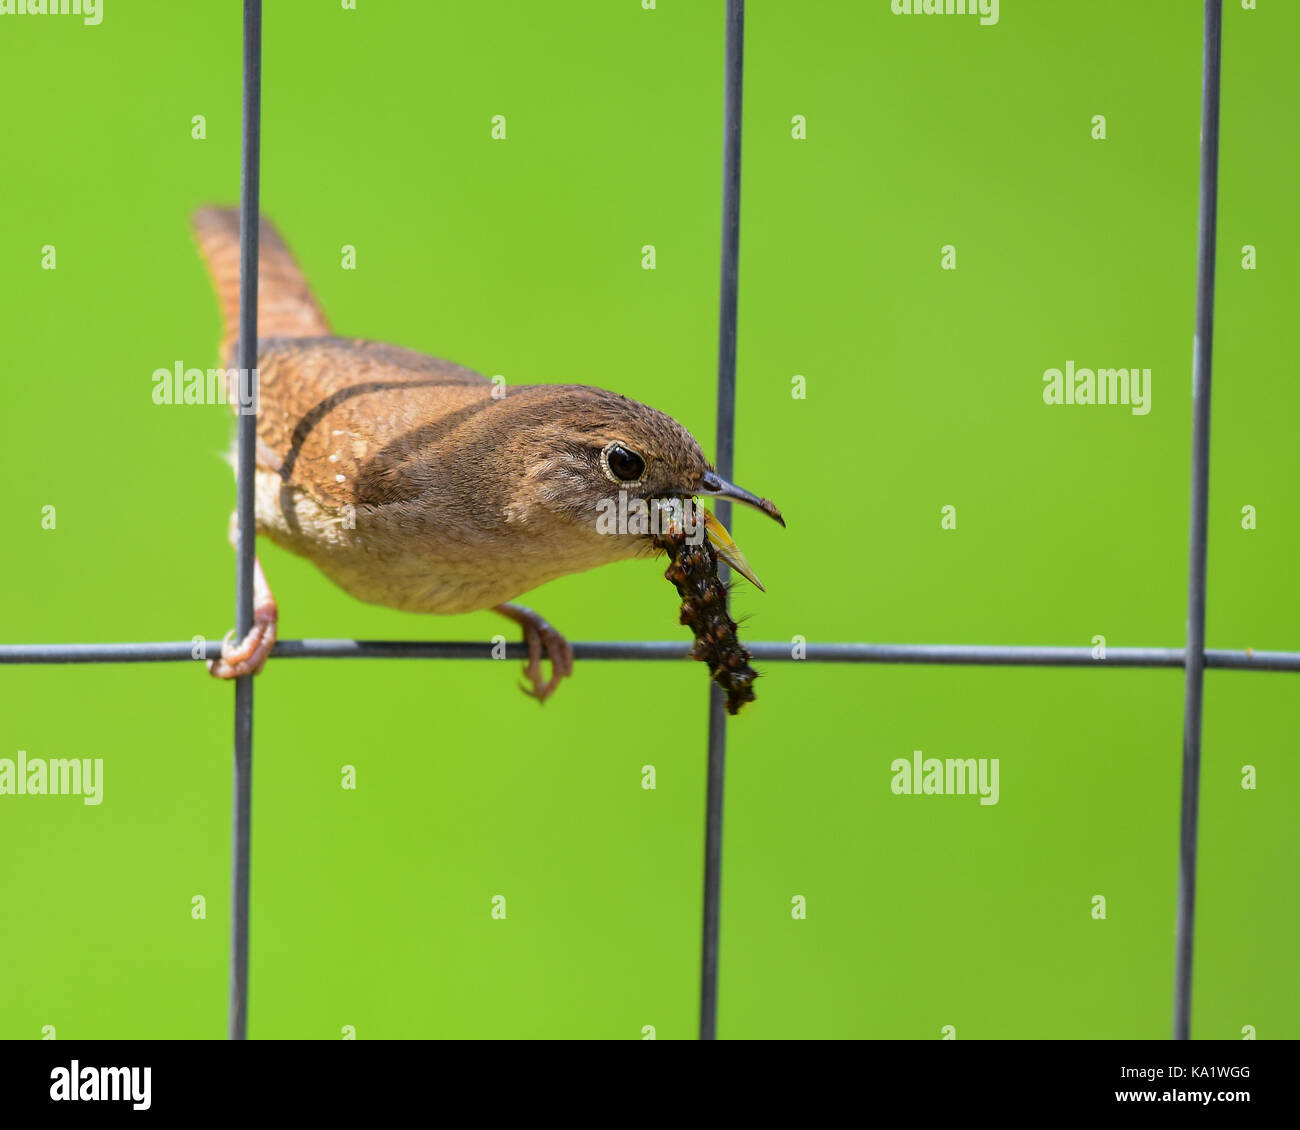 House wren (Troglodytes aedon) sitting on a wire fence eating a caterpillar with a green grass background. Stock Photo